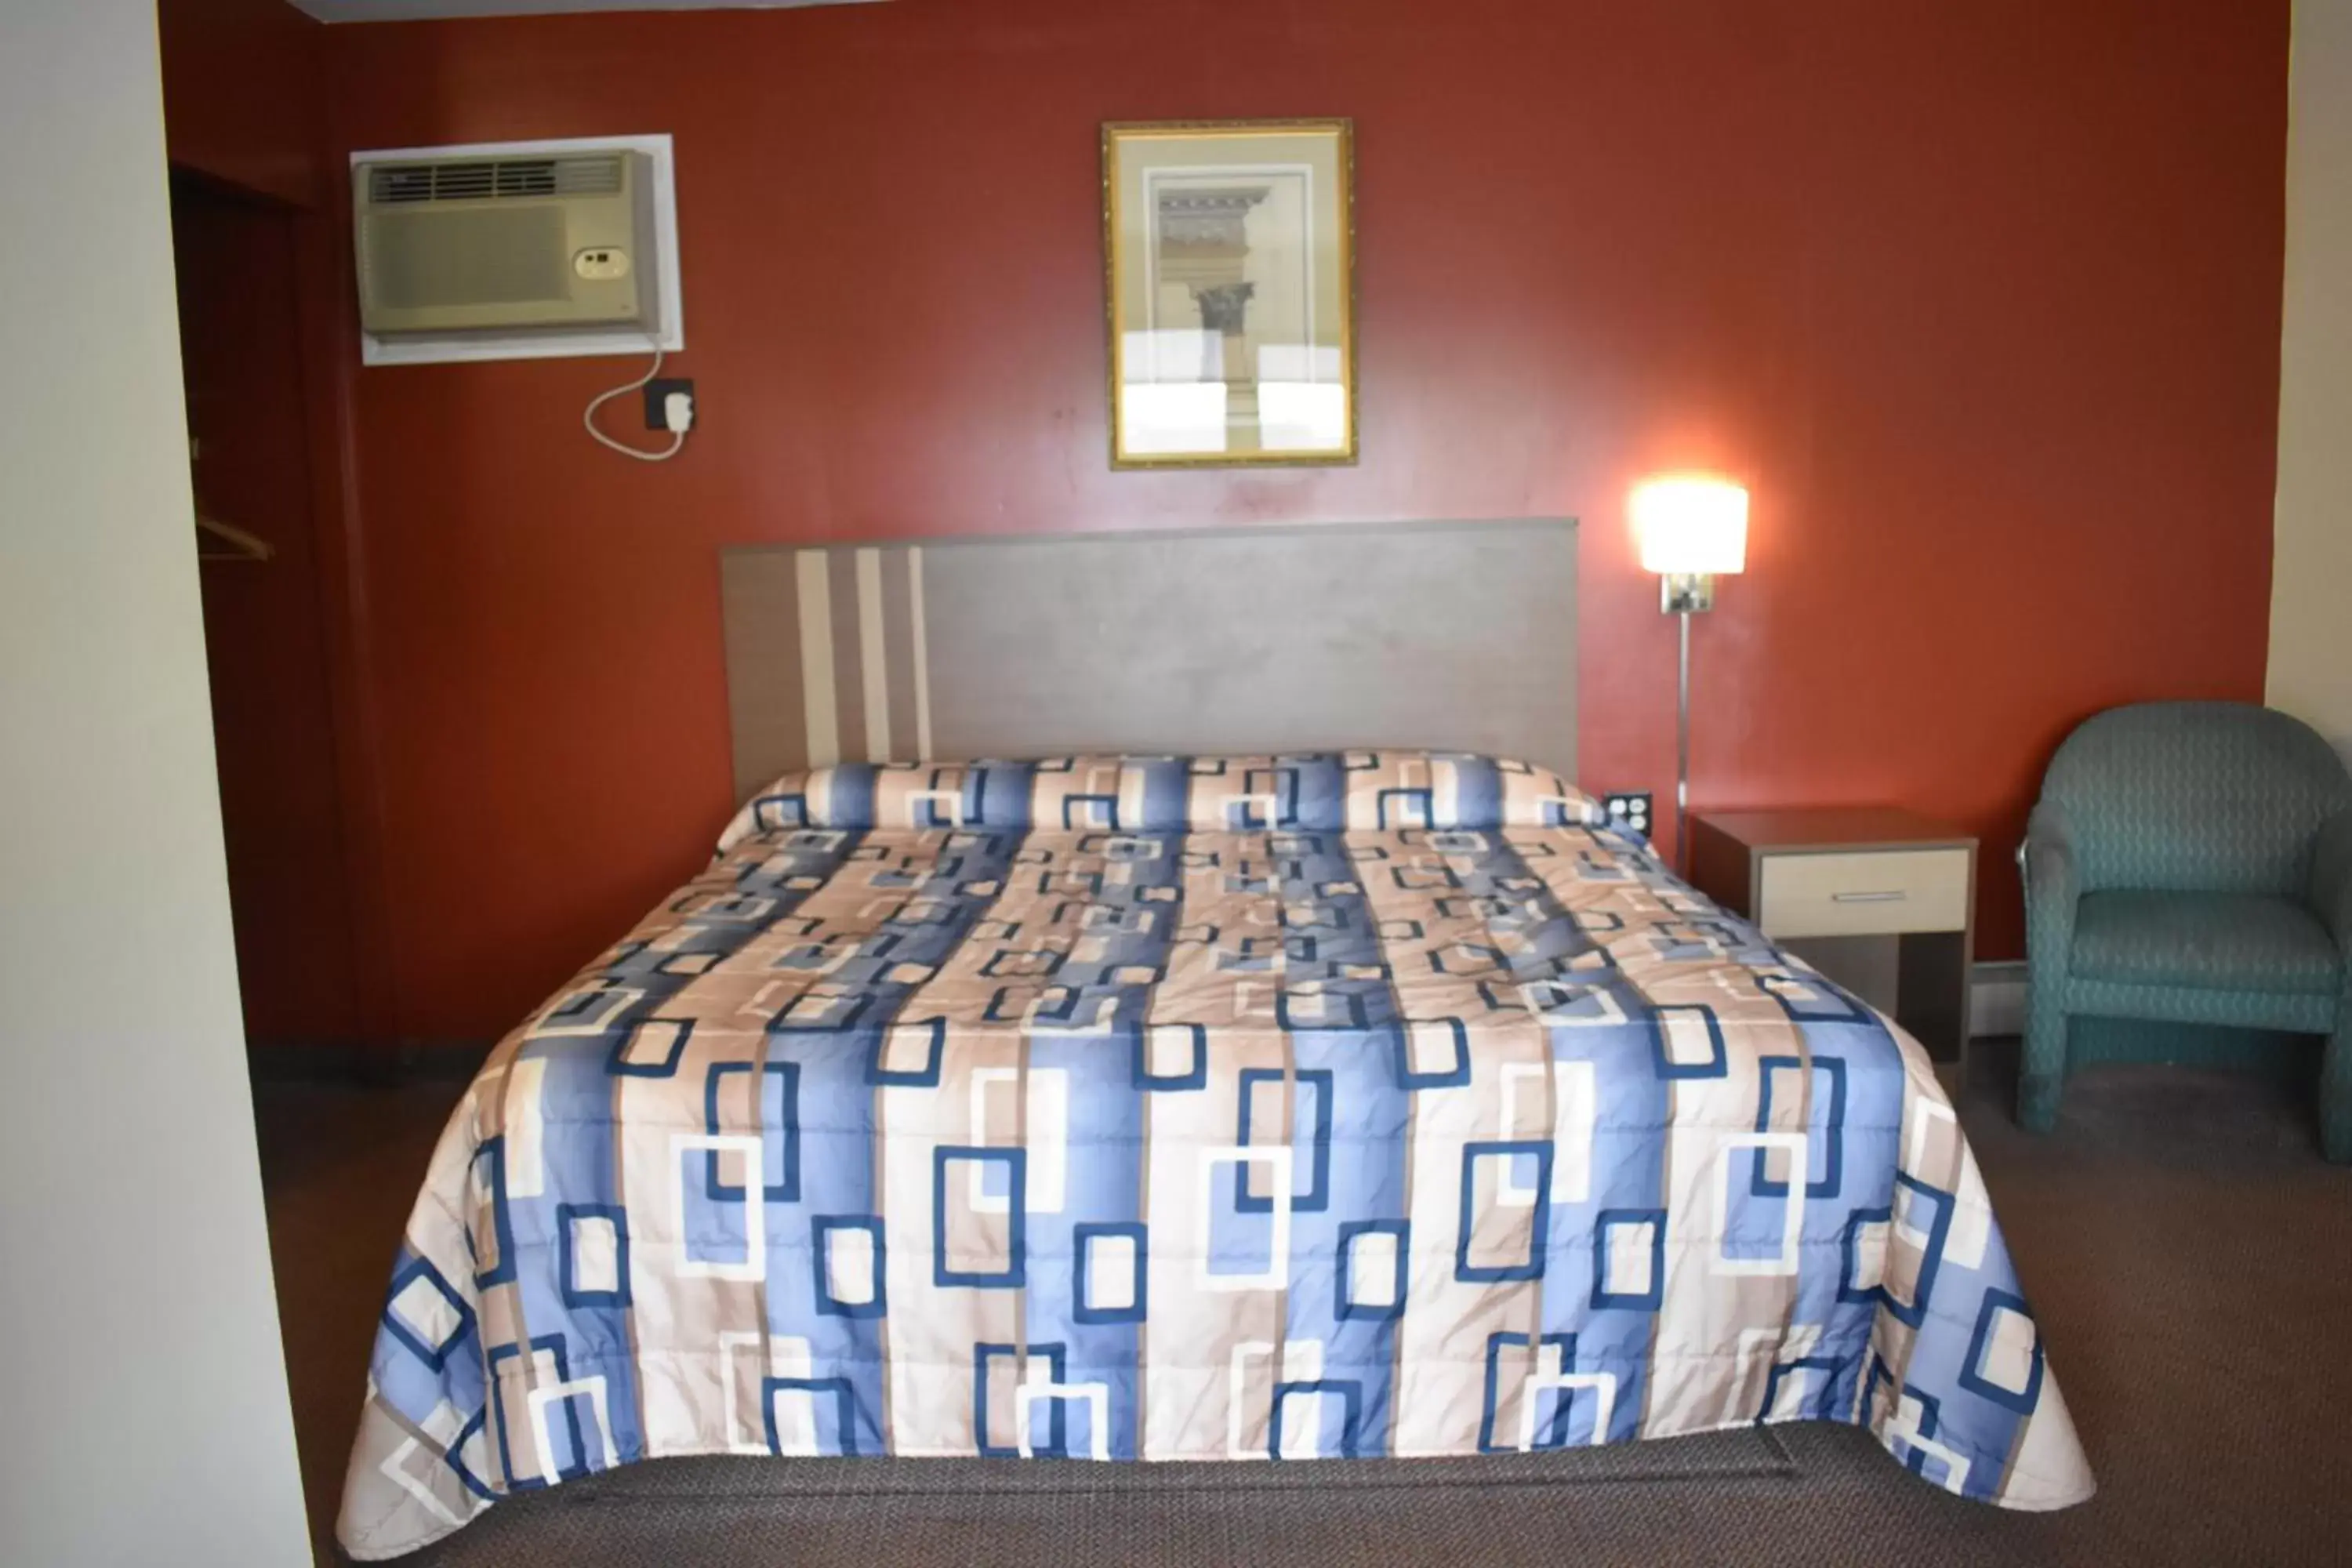 Bed in South Hills Motel